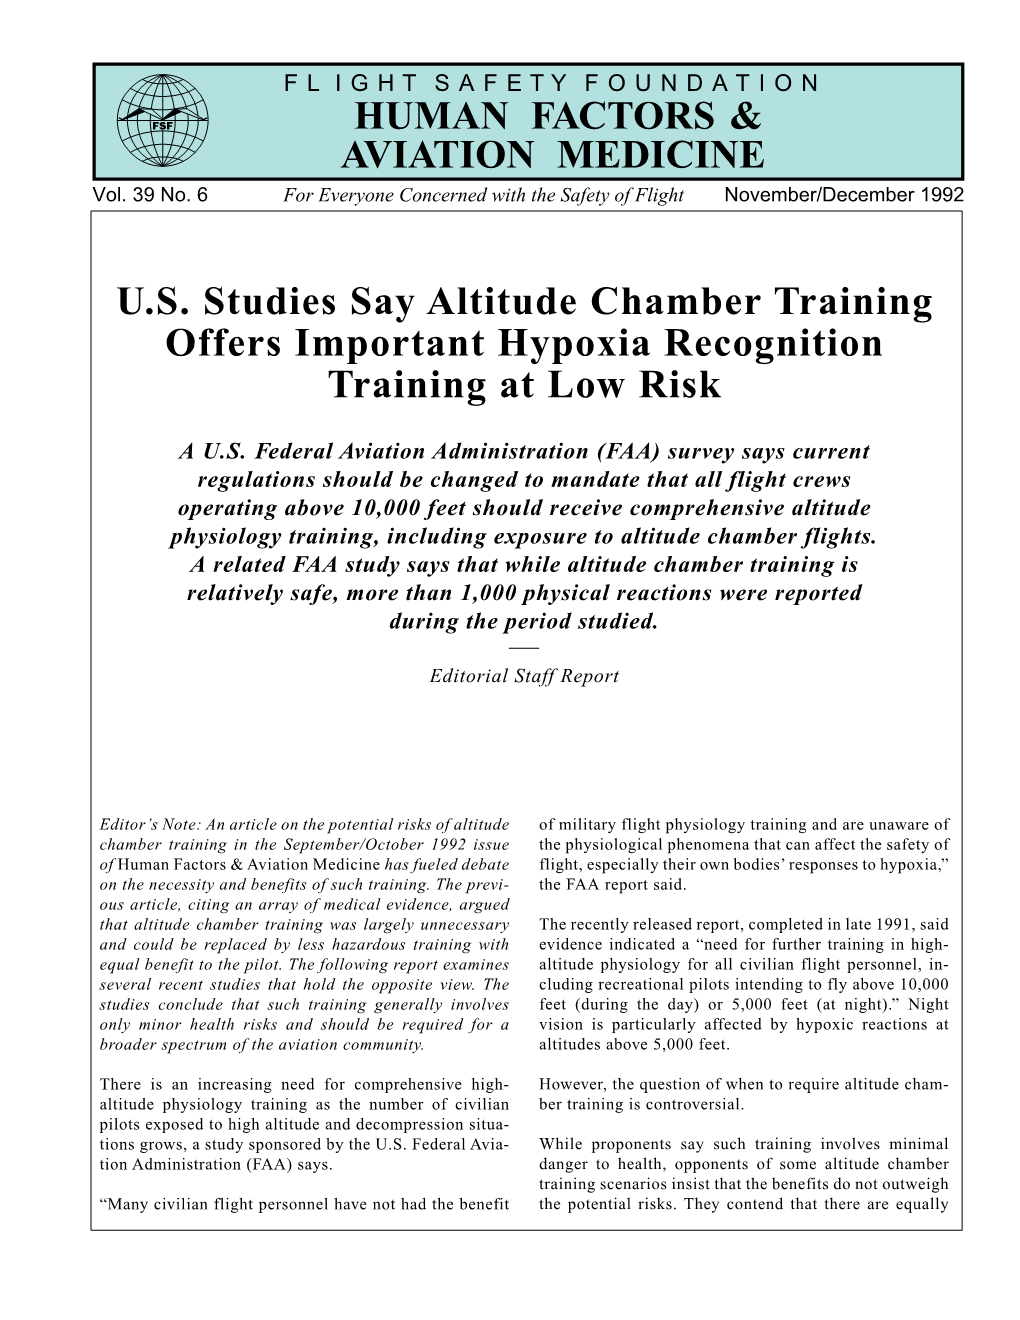 U.S. Studies Say Altitude Chamber Training Offers Important Hypoxia Recognition Training at Low Risk